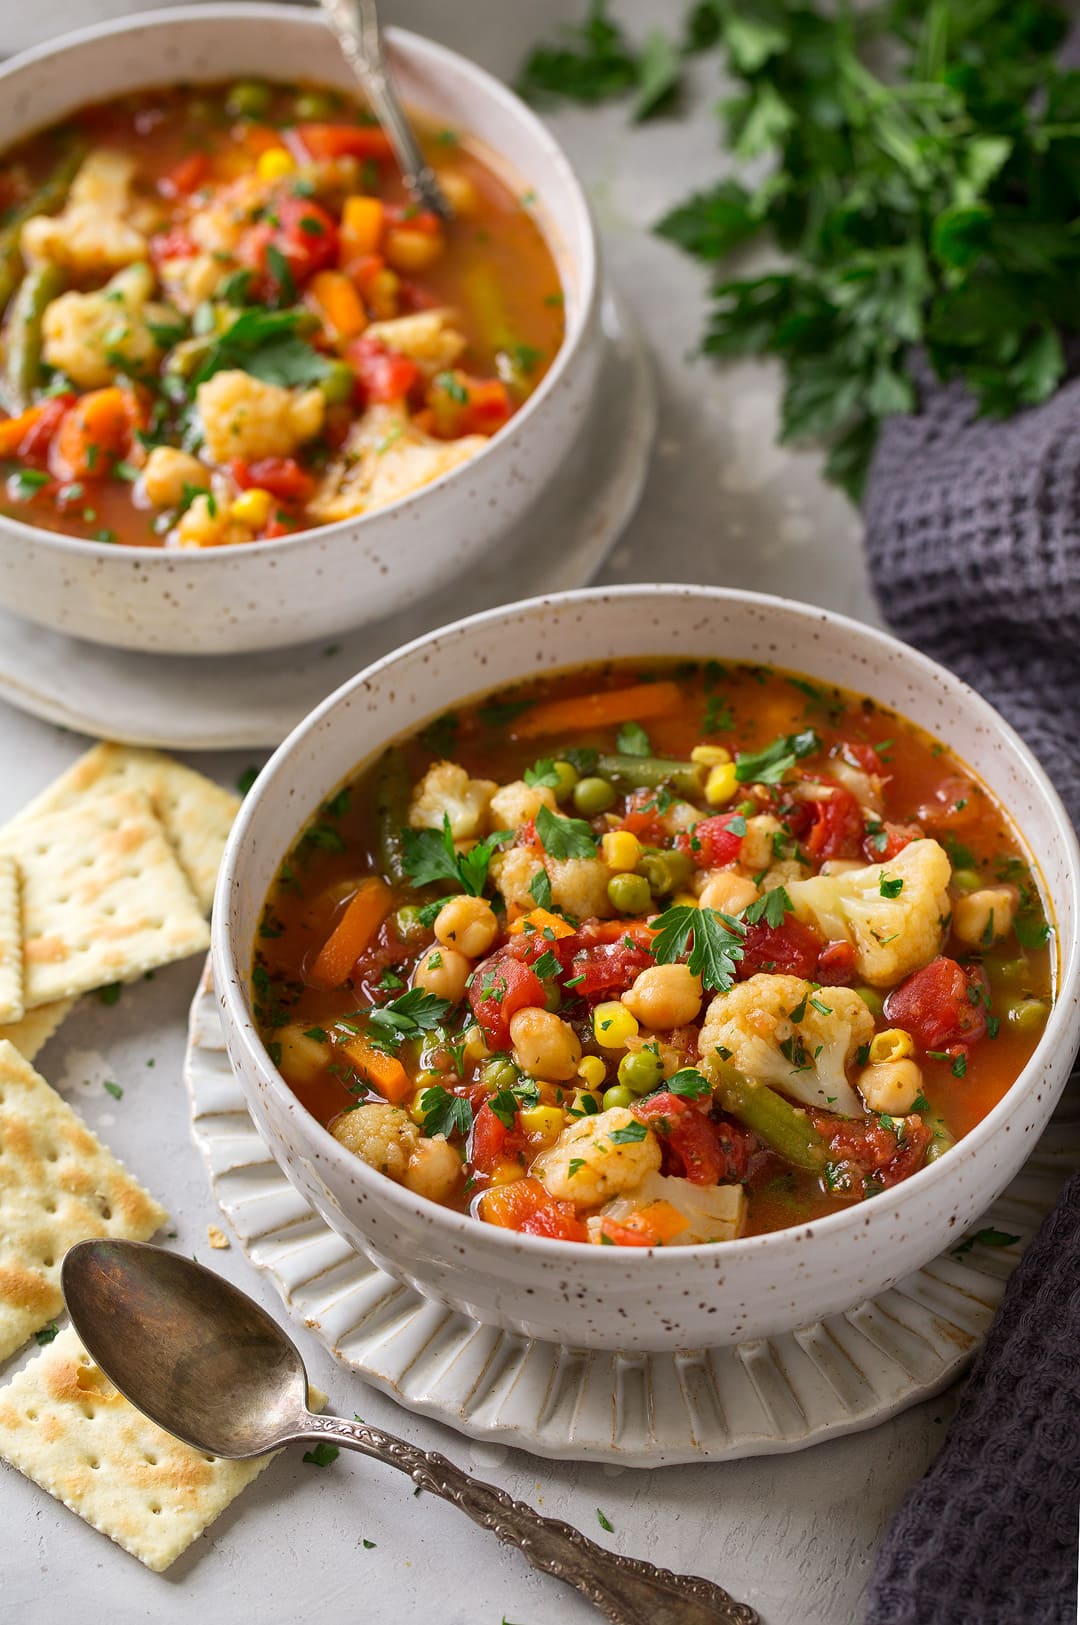 Two servings of Vegetable Soup shown here, with additions of cauliflower, frozen vegetables, canned tomatoes, and chick peas.